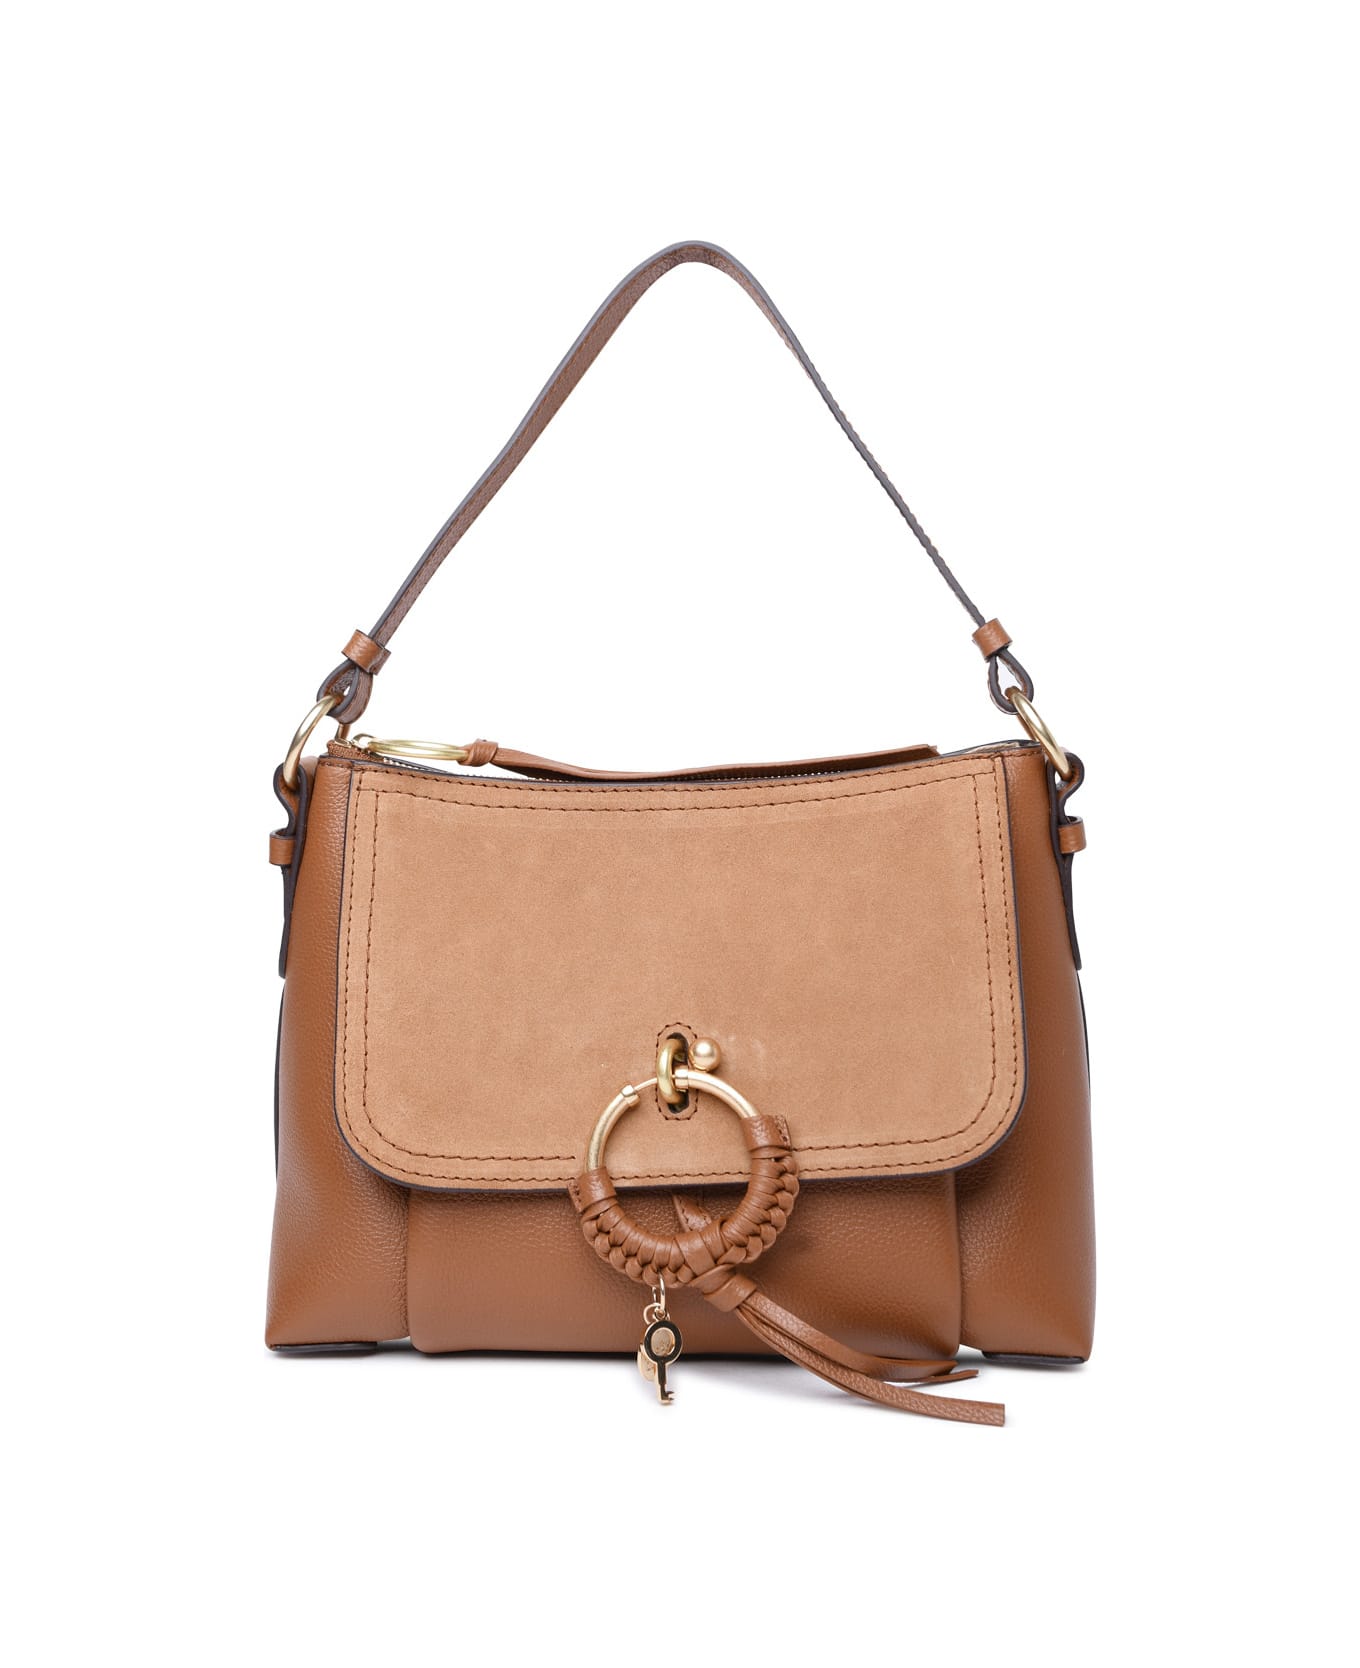 See by Chloé Small 'joan' Caramel Leather Bag - Brown トートバッグ